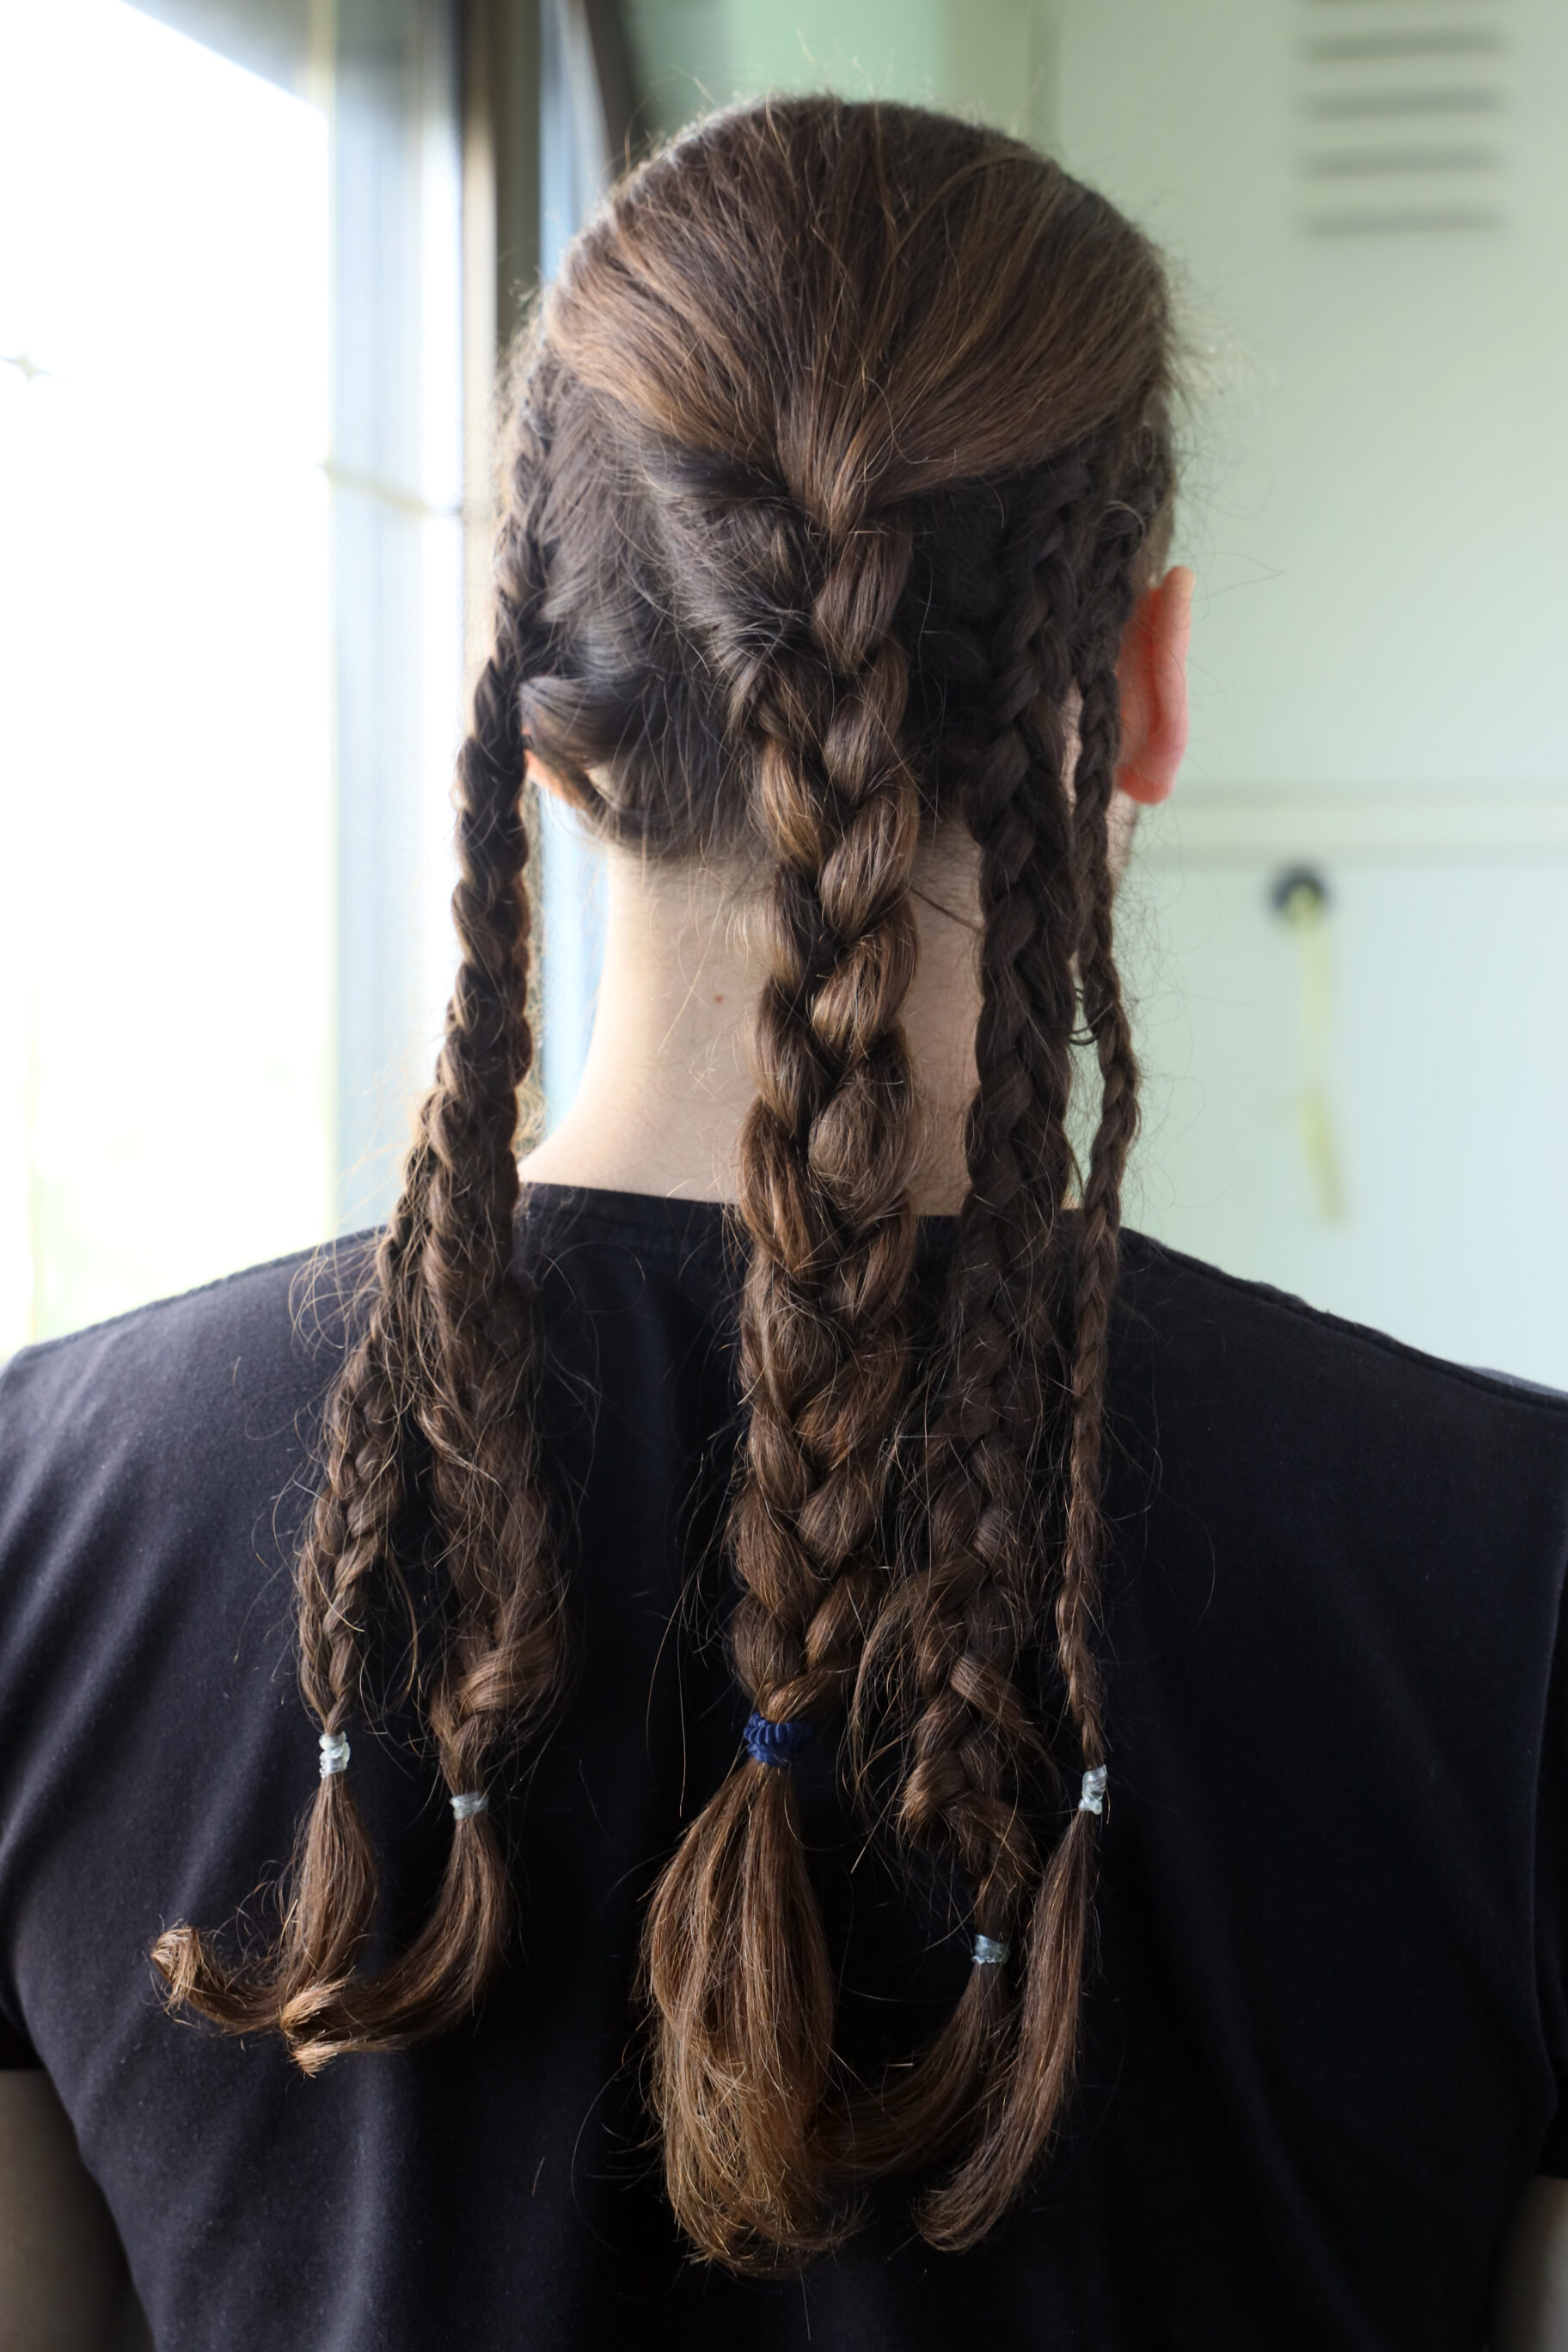 Long Side Braids With Ponytail